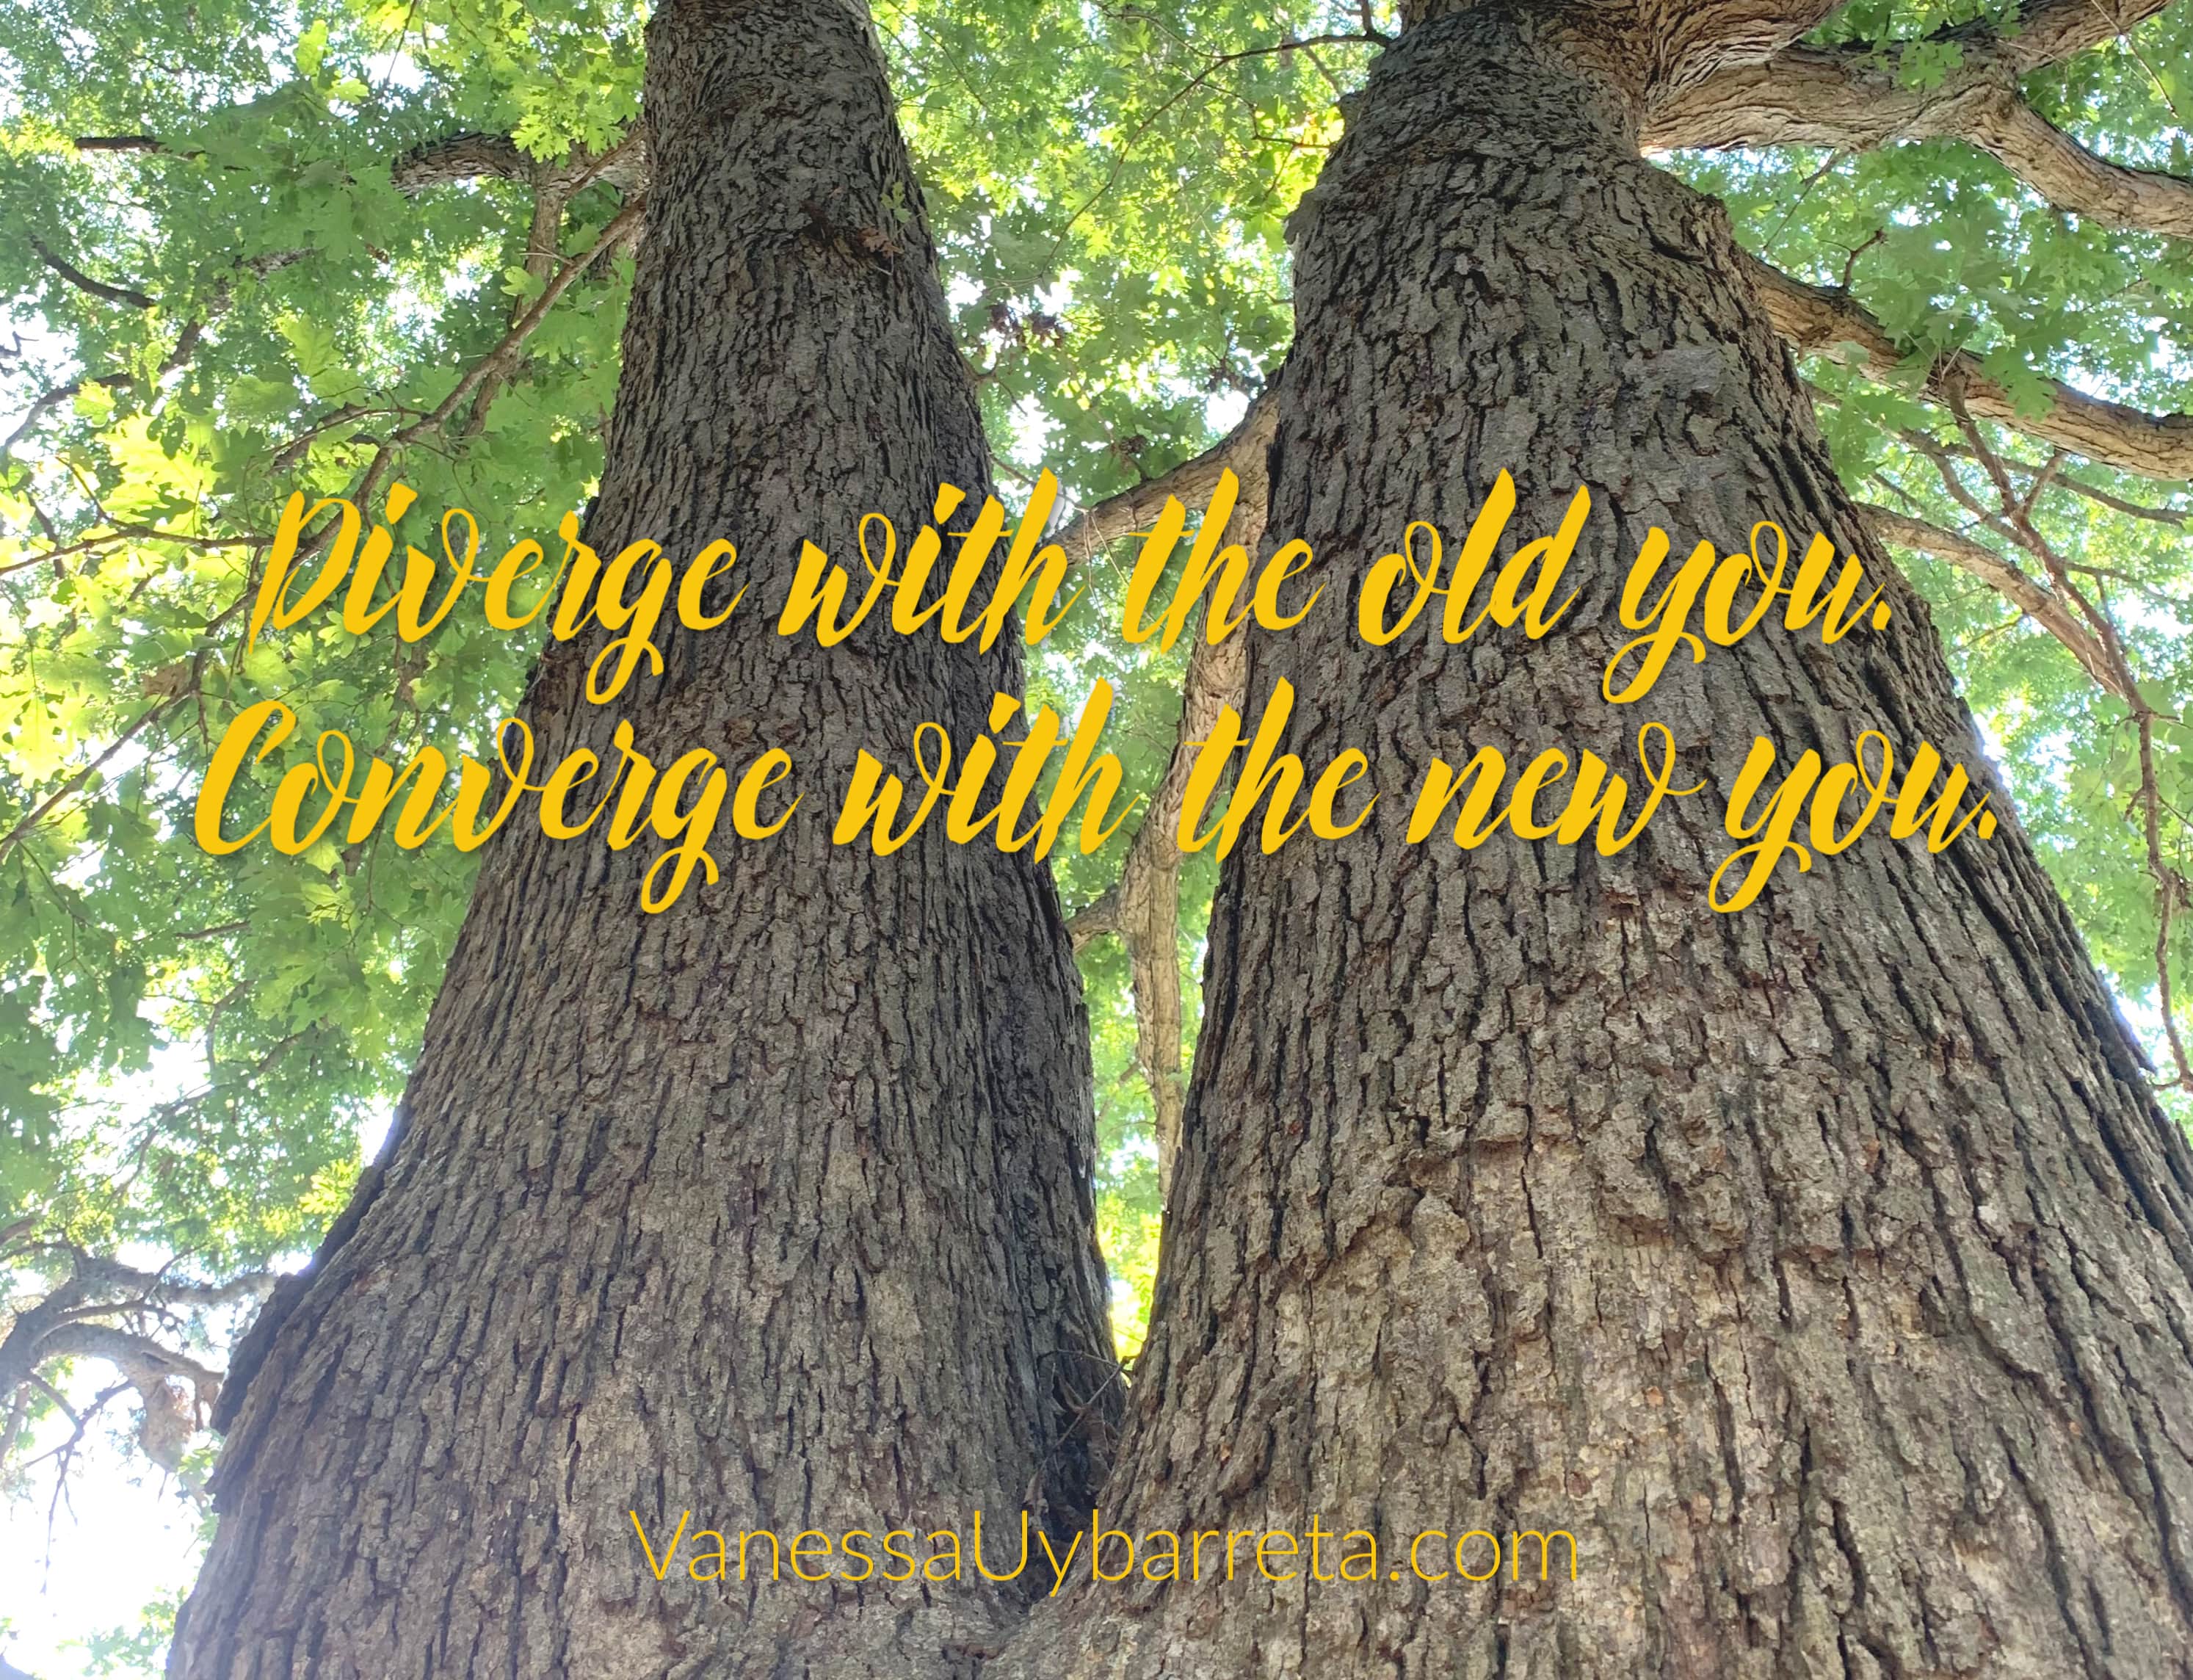 Diverge with the old you. Converge with the new you.